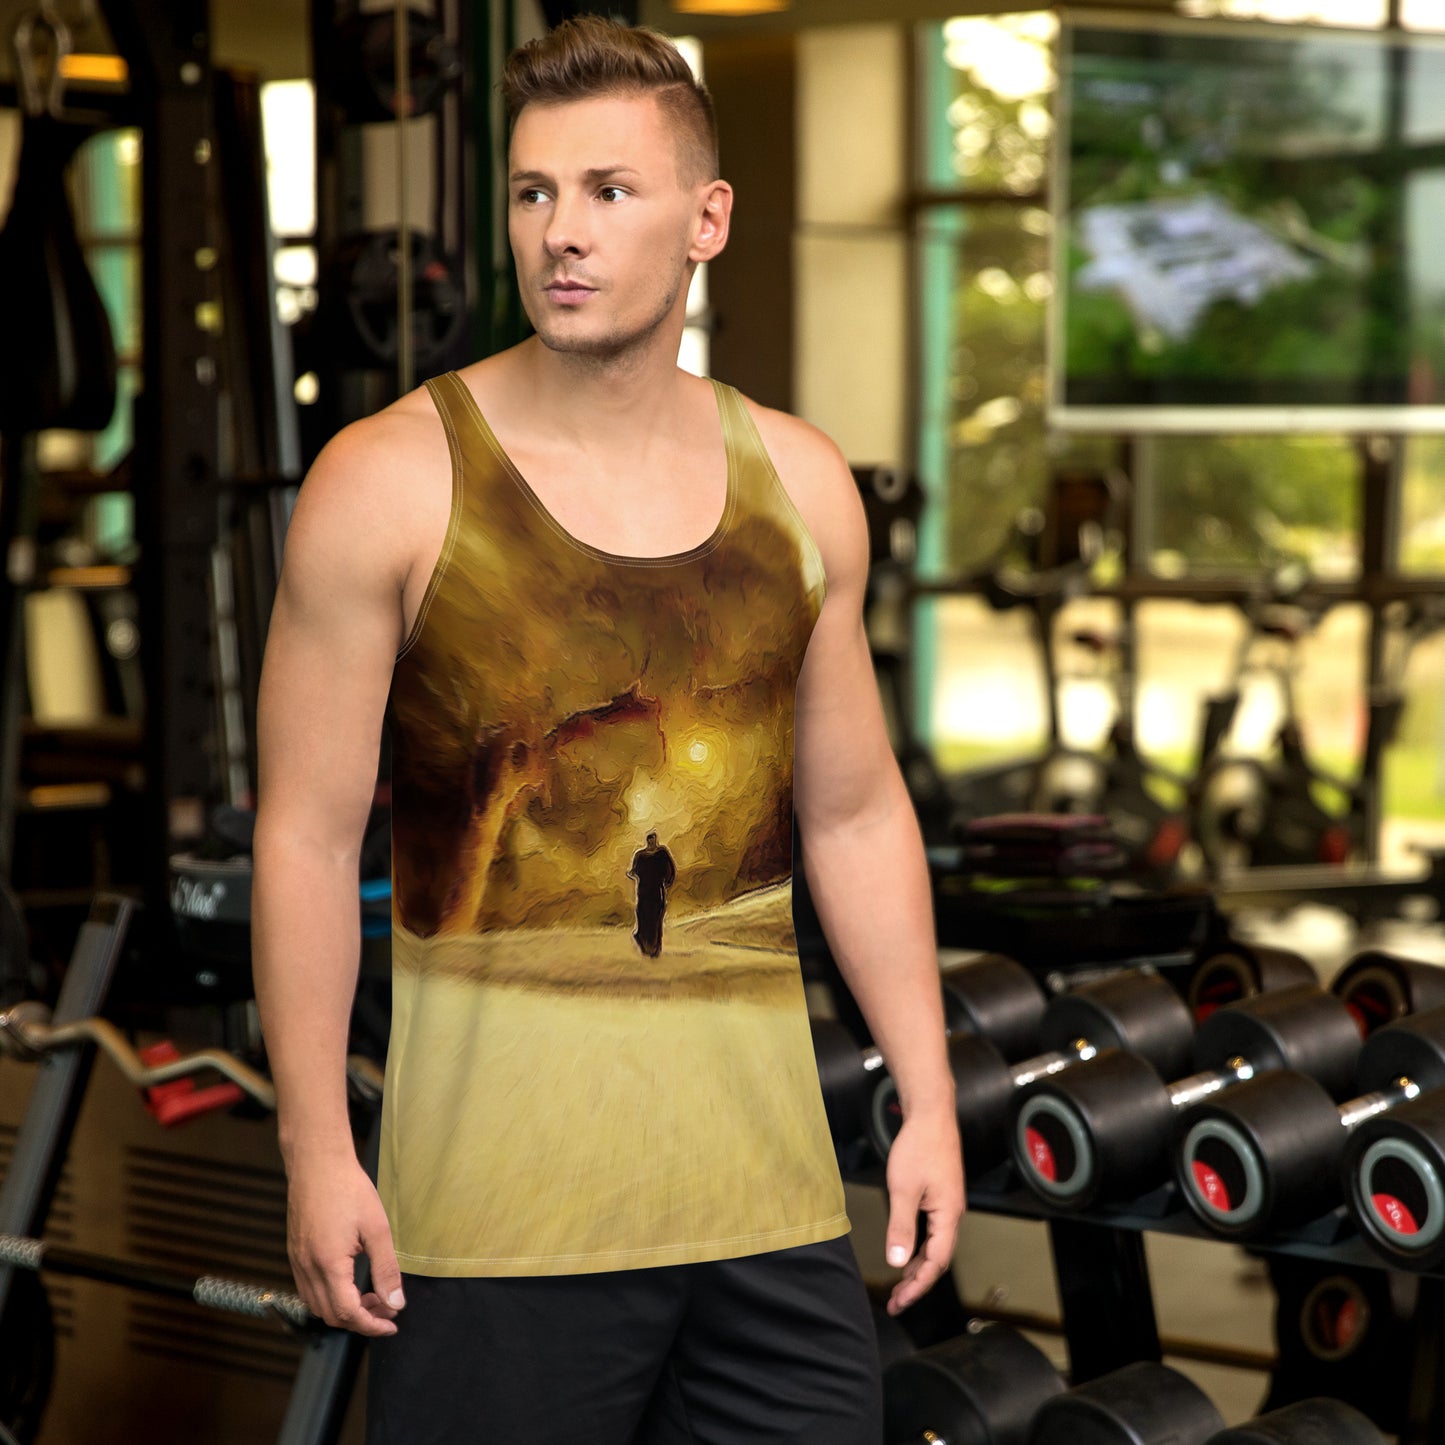 Eye Of The Sand Storm - Mens Tank Top